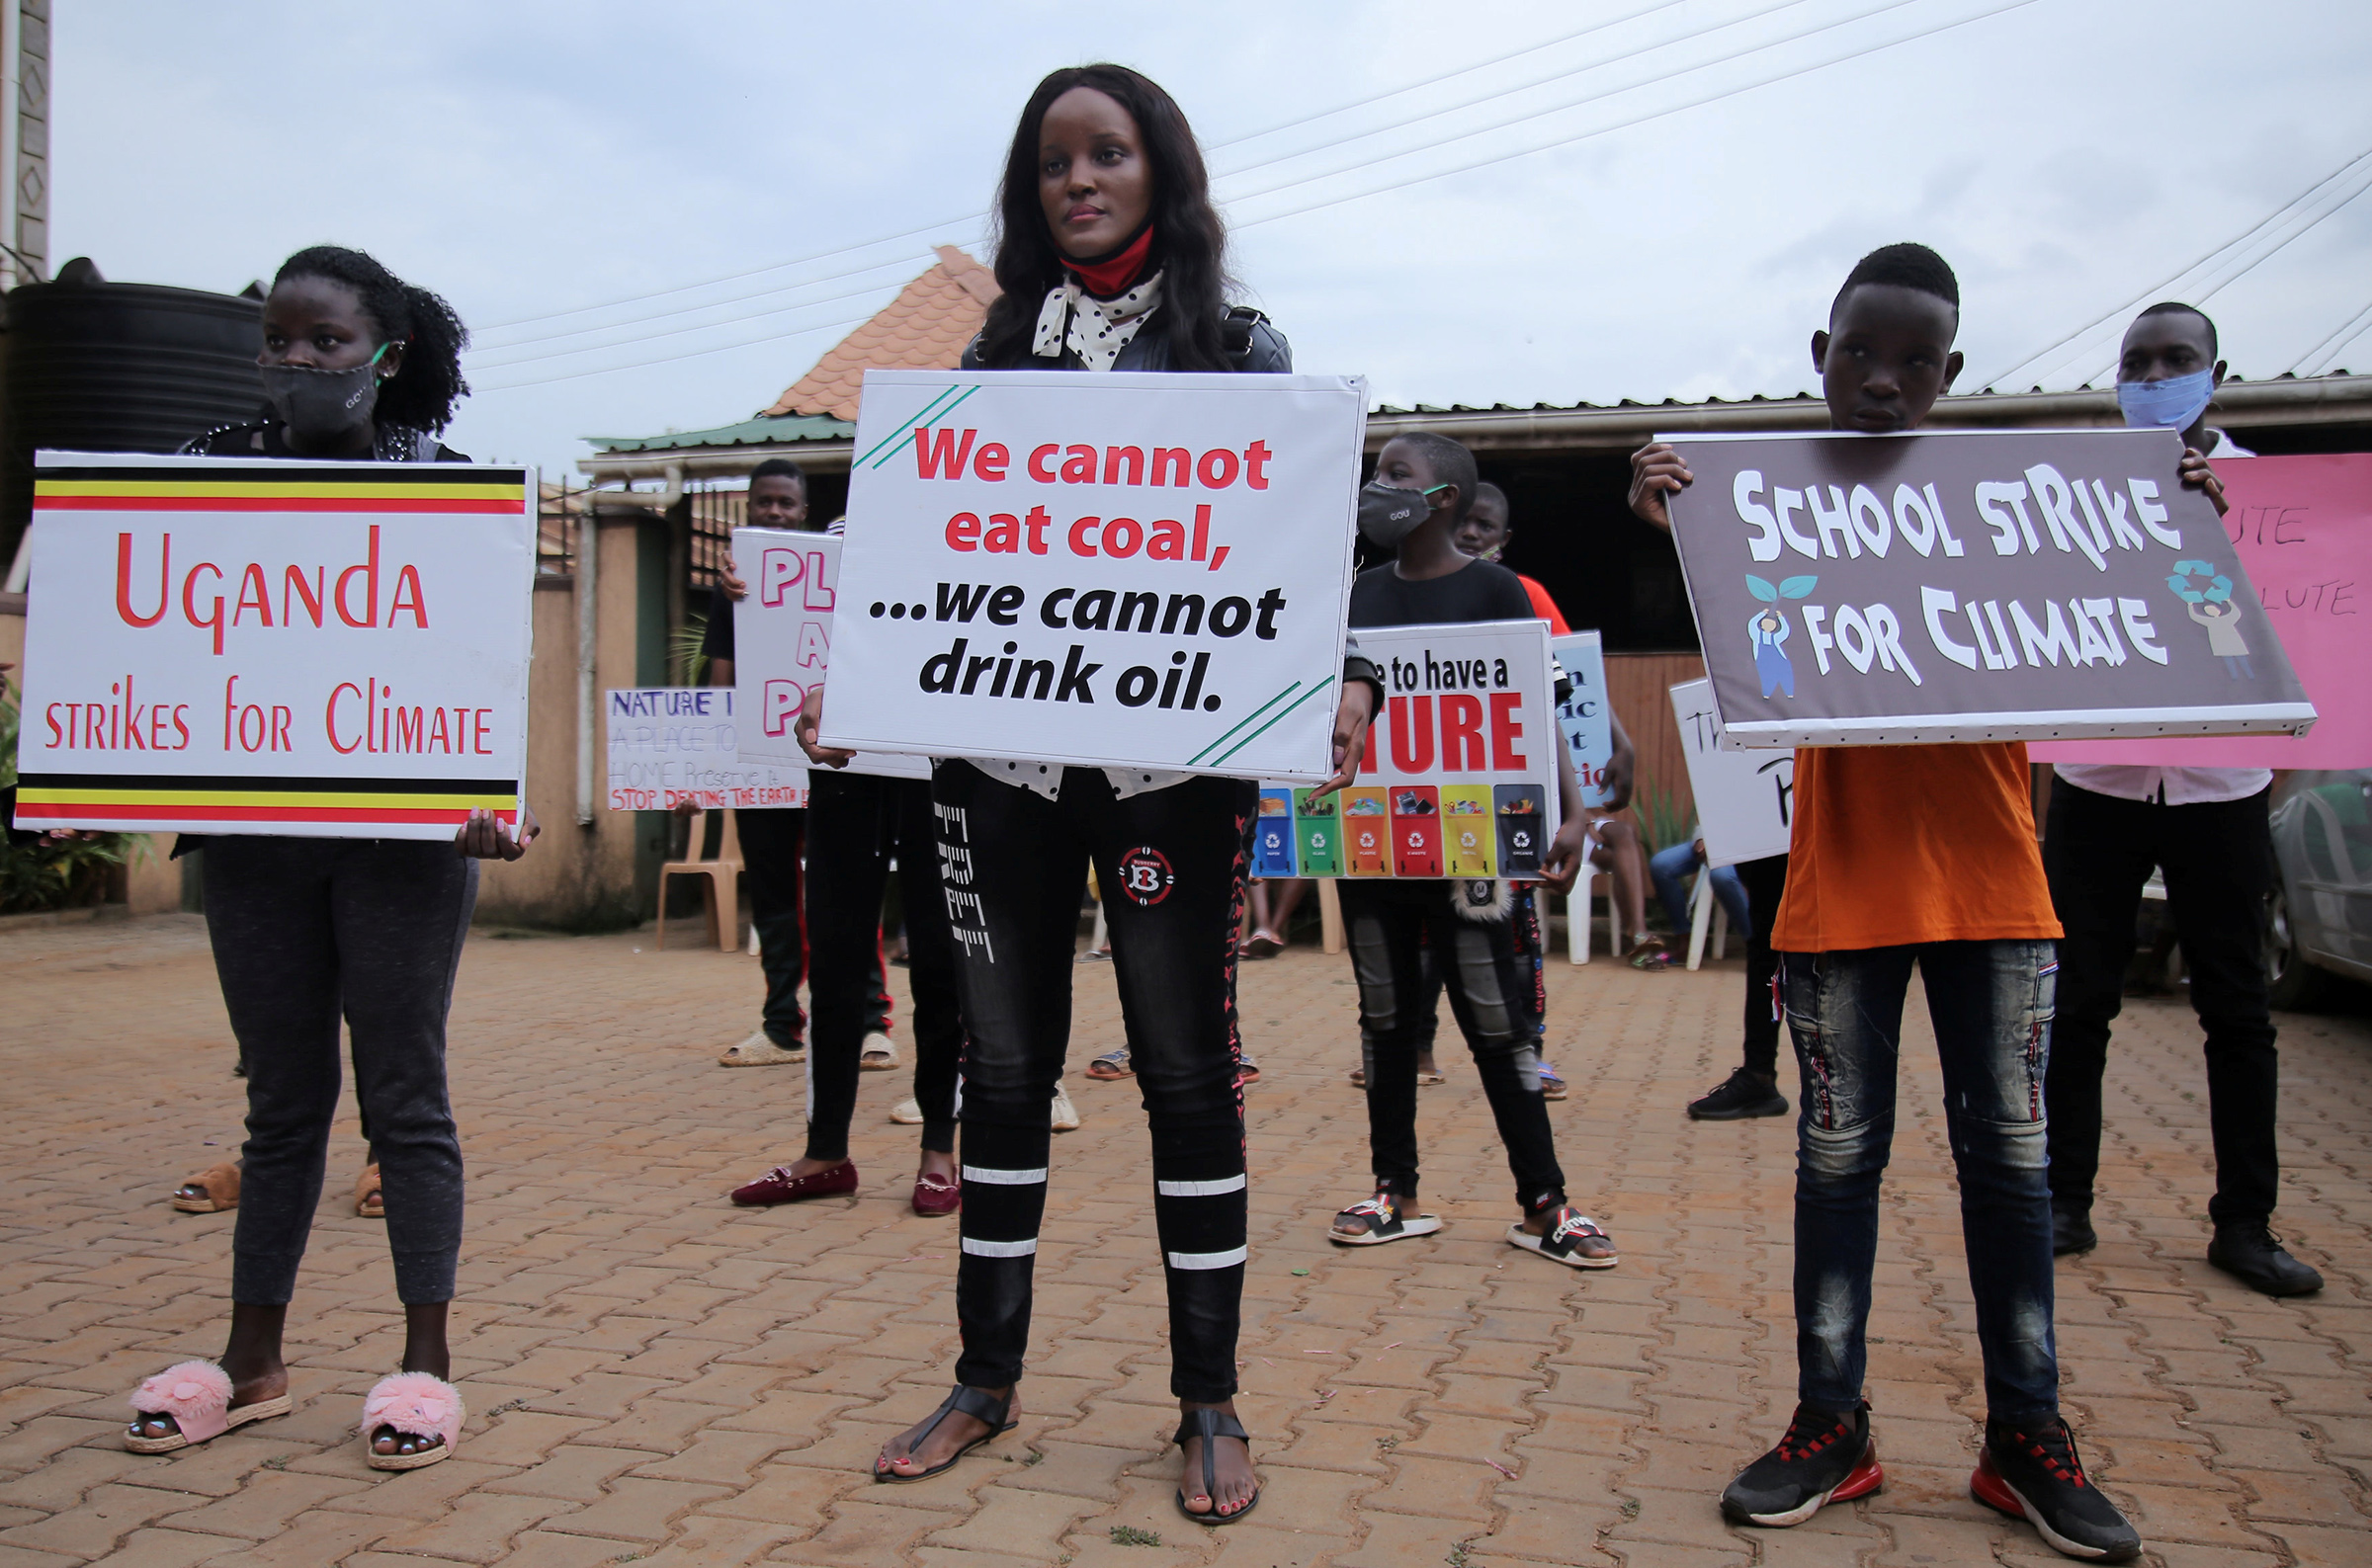 Nakate and other activists protest in Kampala, Uganda on Sept. 25, 2020. (Abubaker Lubowa—Reuters)